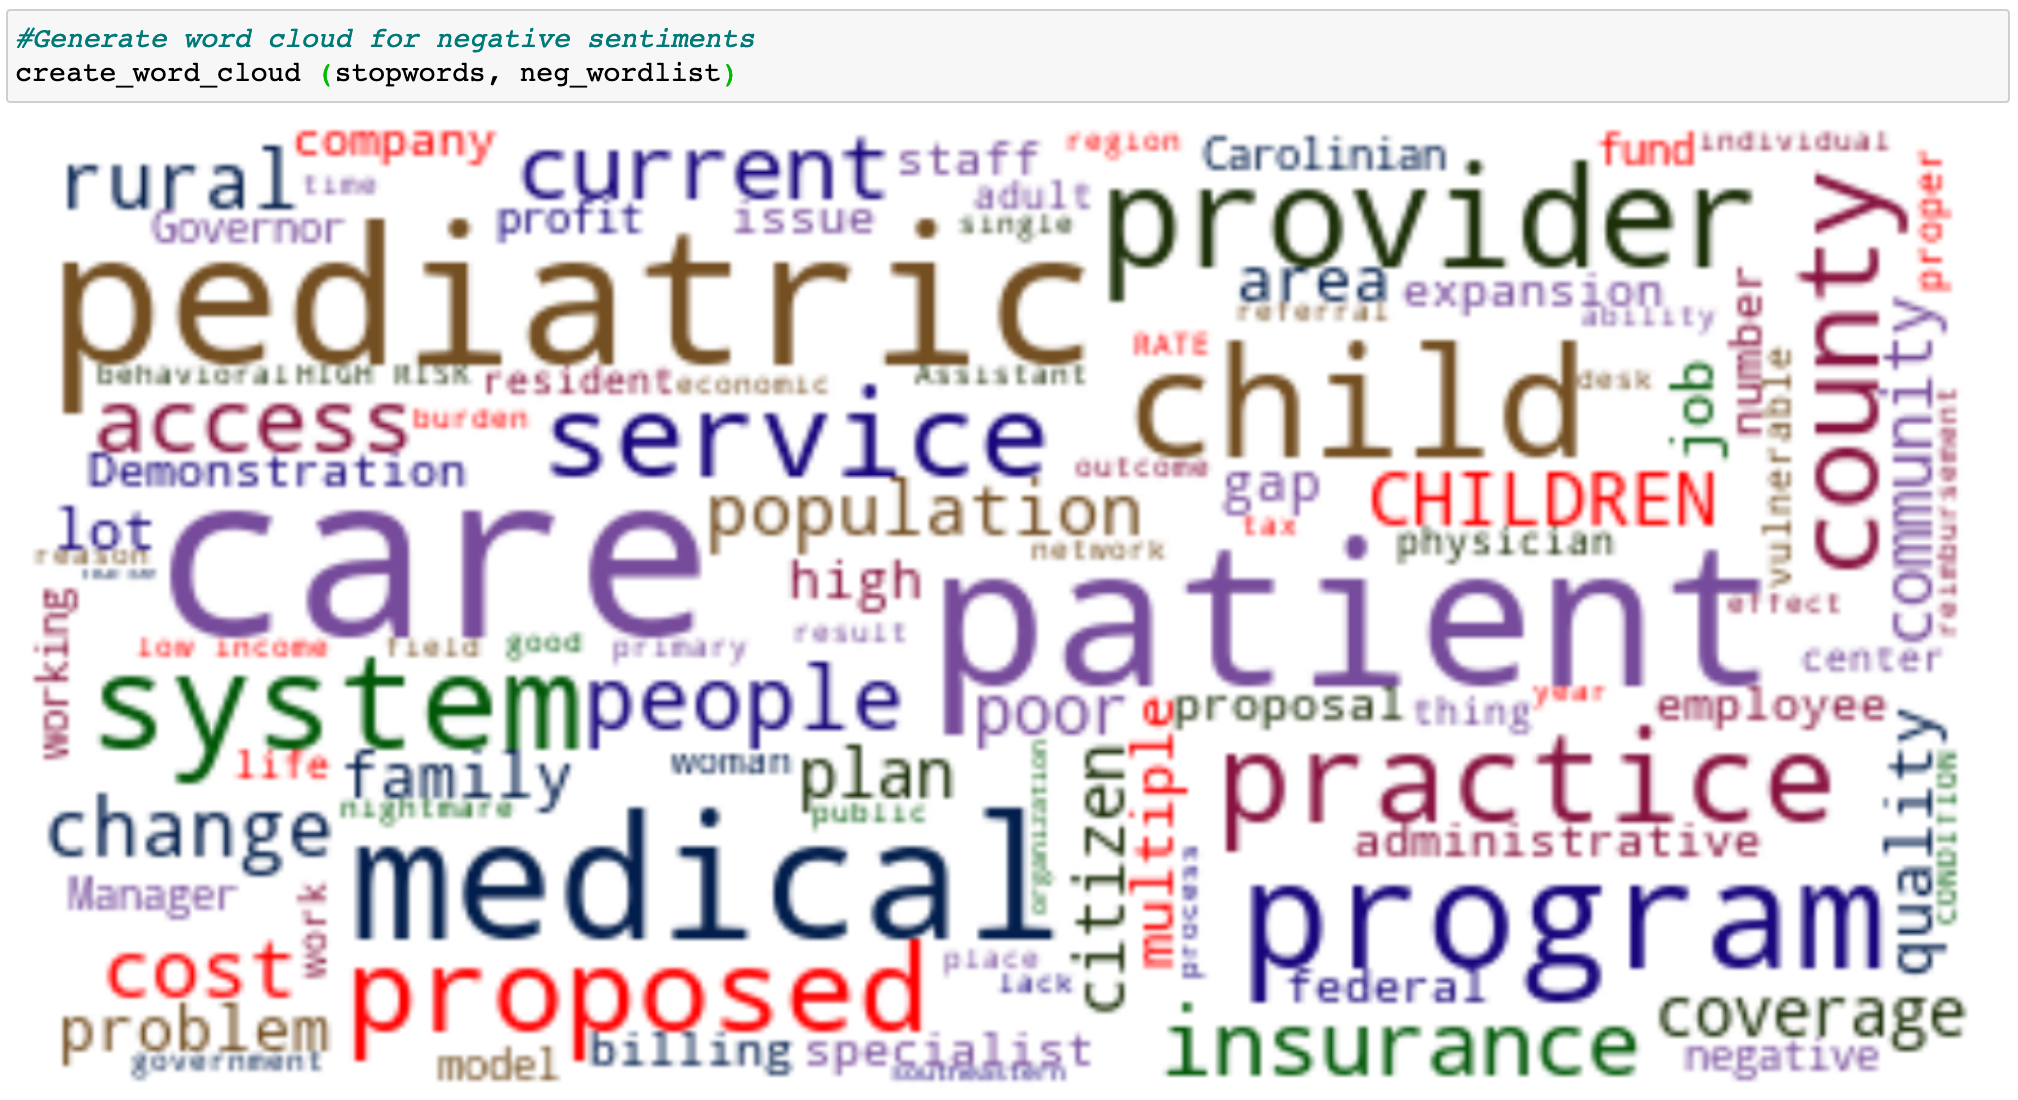 Word cloud image of the negative sentiments